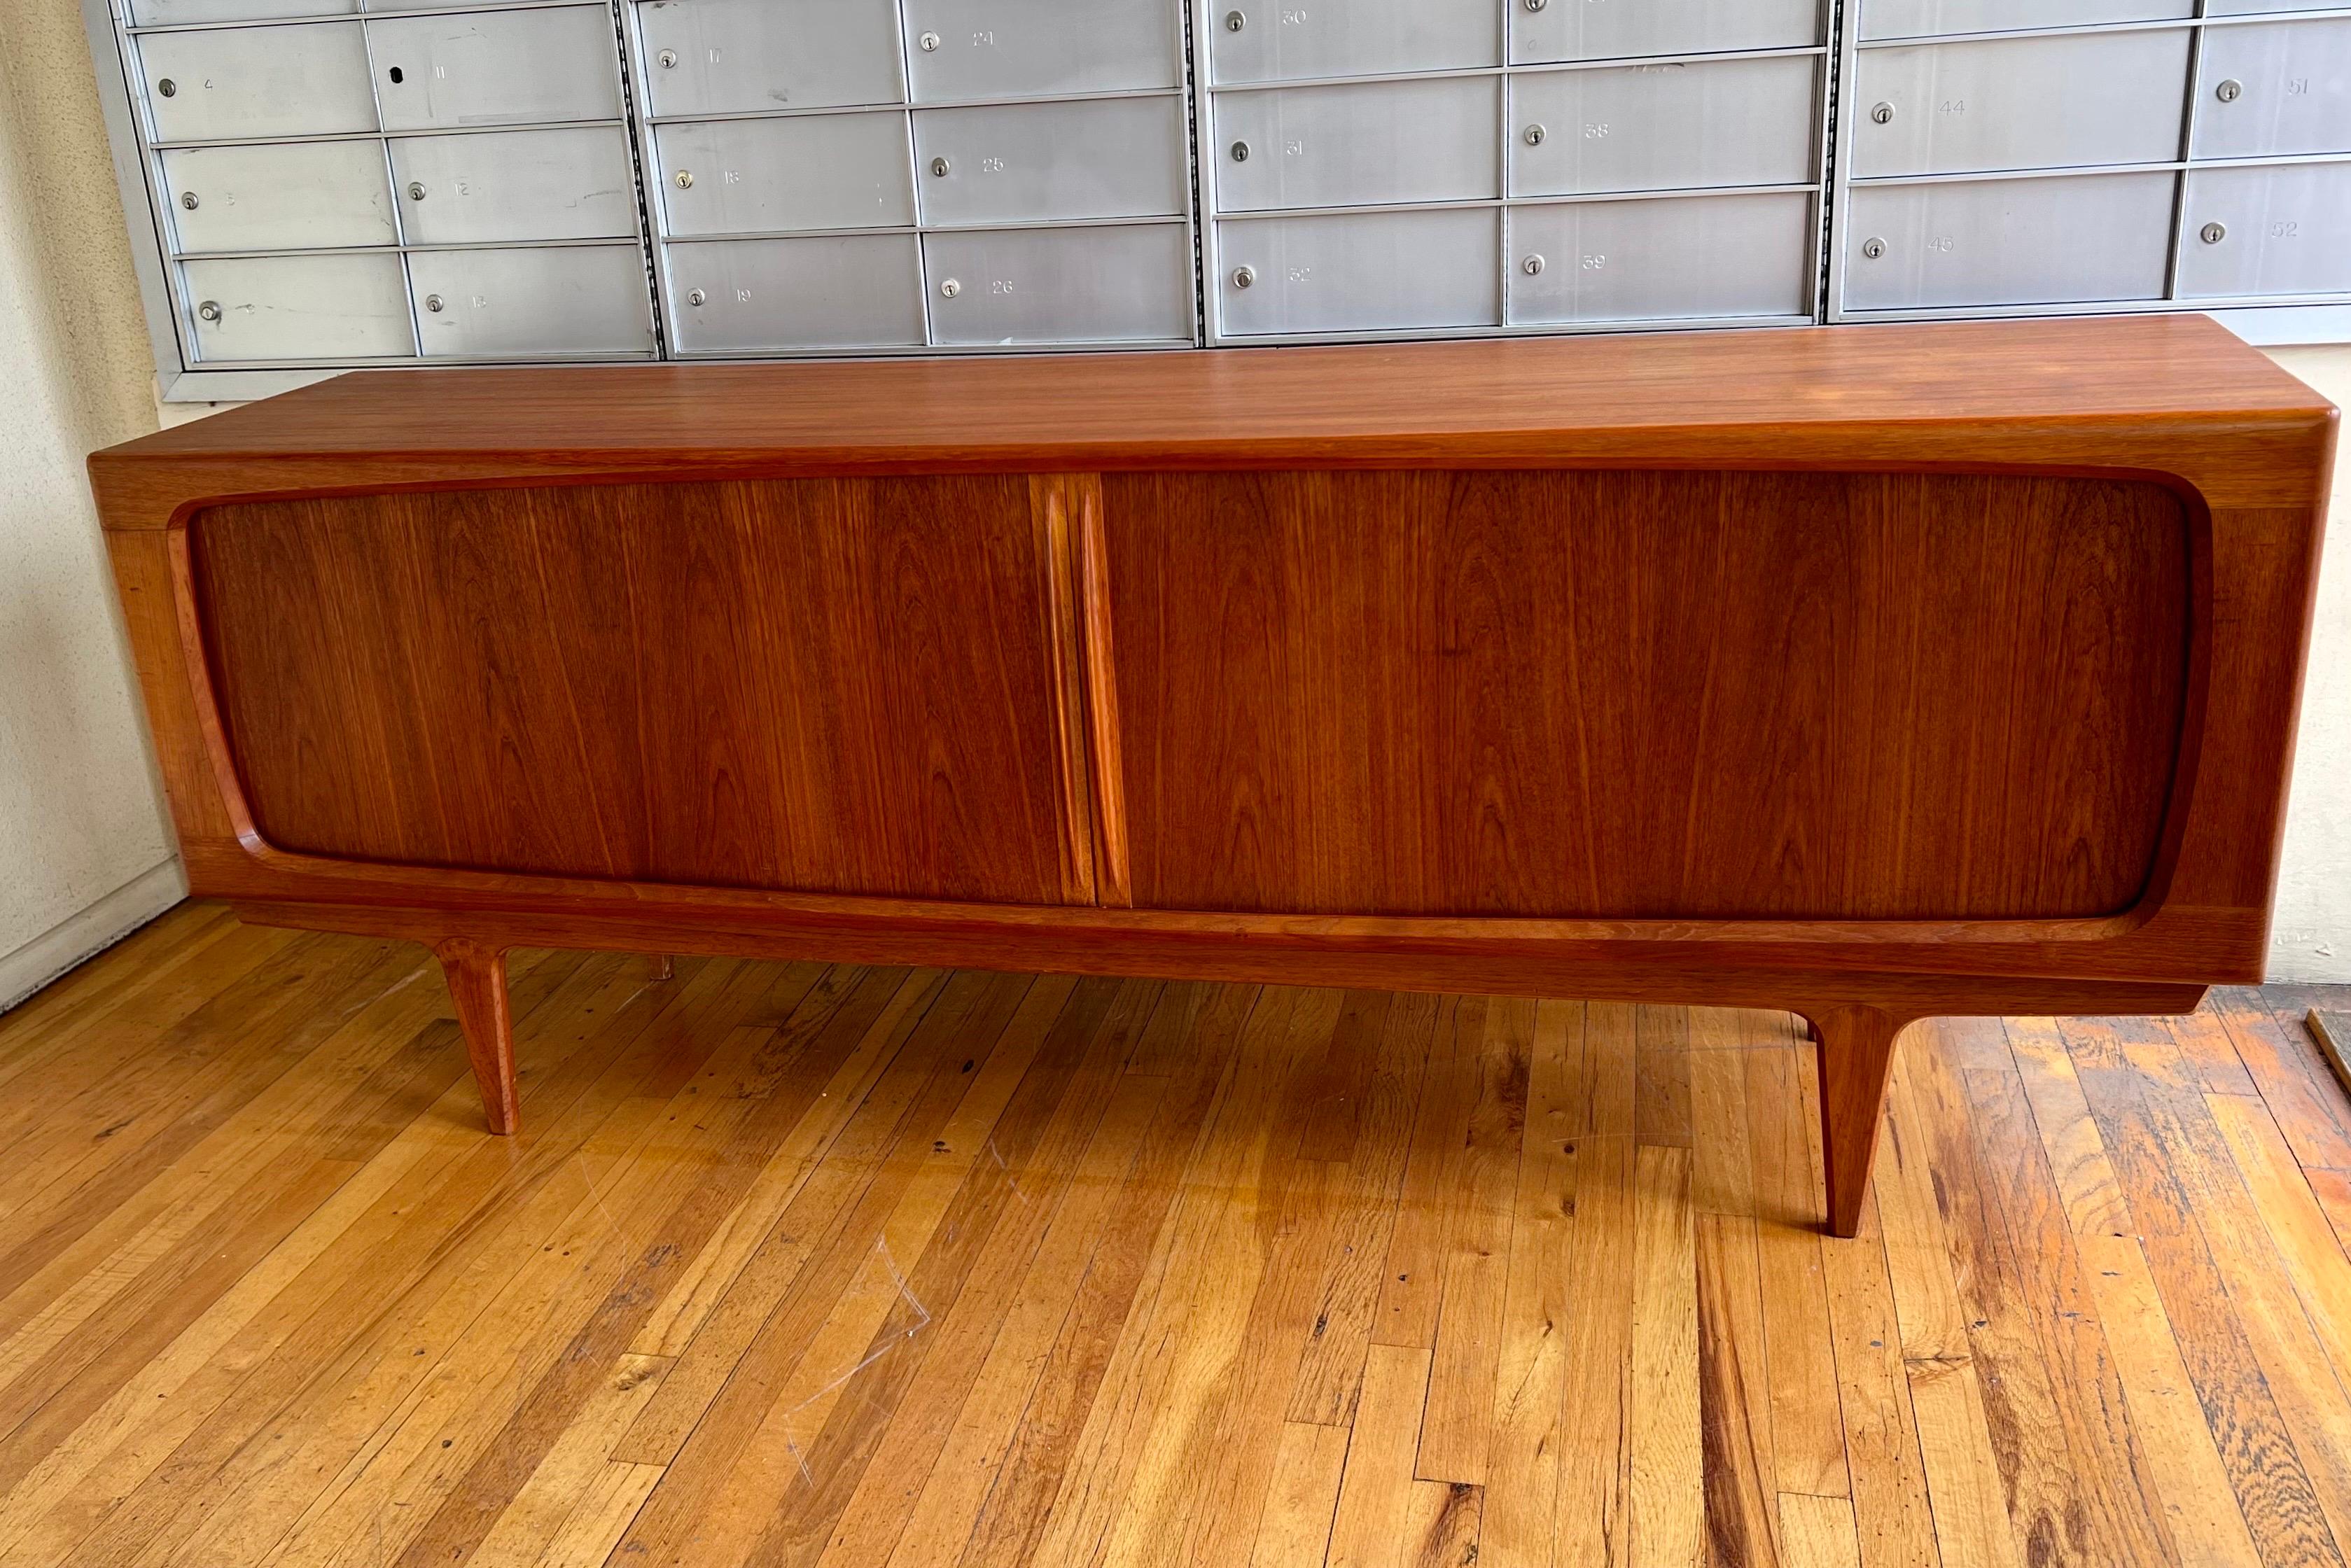 Beautiful and rare striking Danish modern tambour door teak credenza sideboard manufactured in Denmark in the 1960s. Rare model incredible craftsmanship lots of storage dovetail drawers and shelves, we refinished the piece with some light